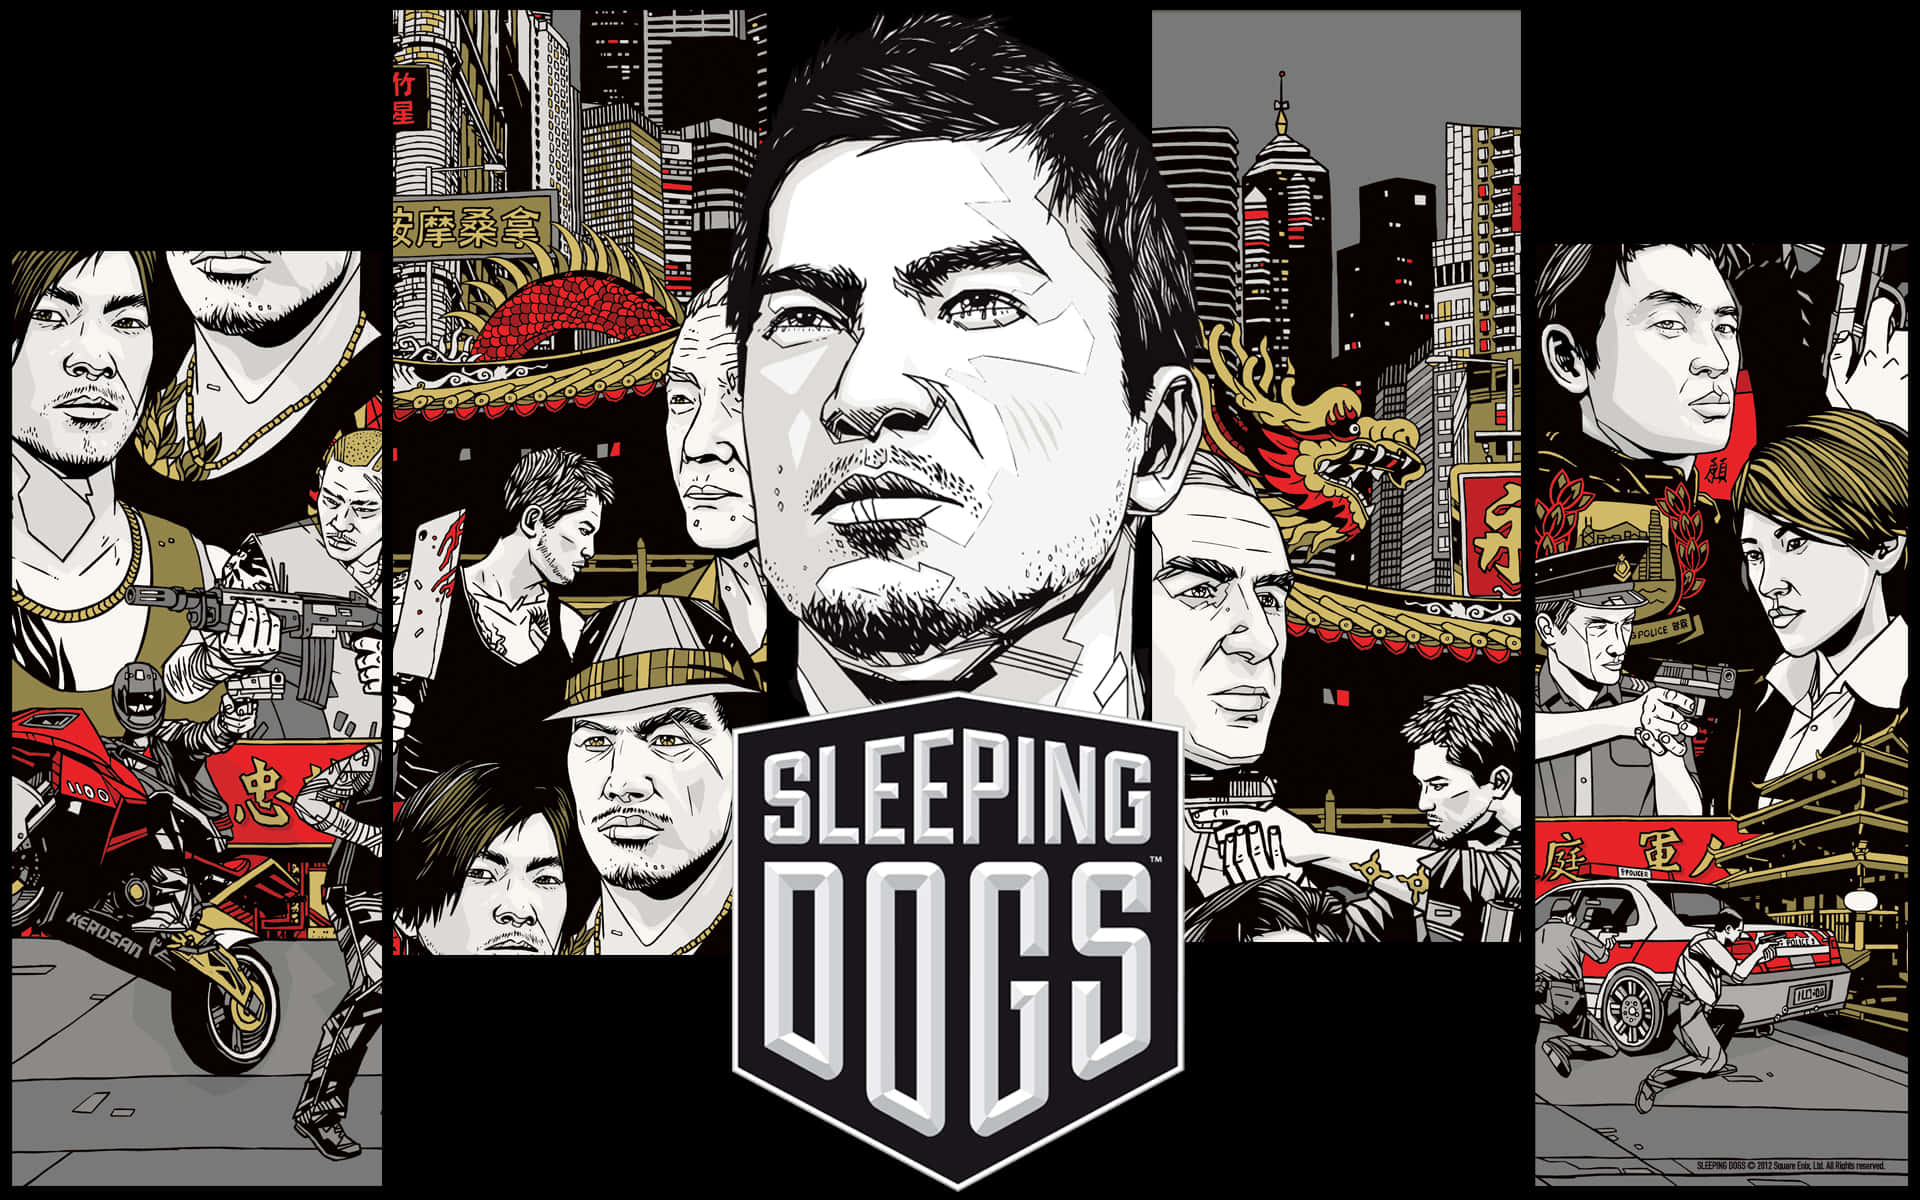 Take the historic streets of Hong Kong by storm in Sleeping Dogs 2. Wallpaper